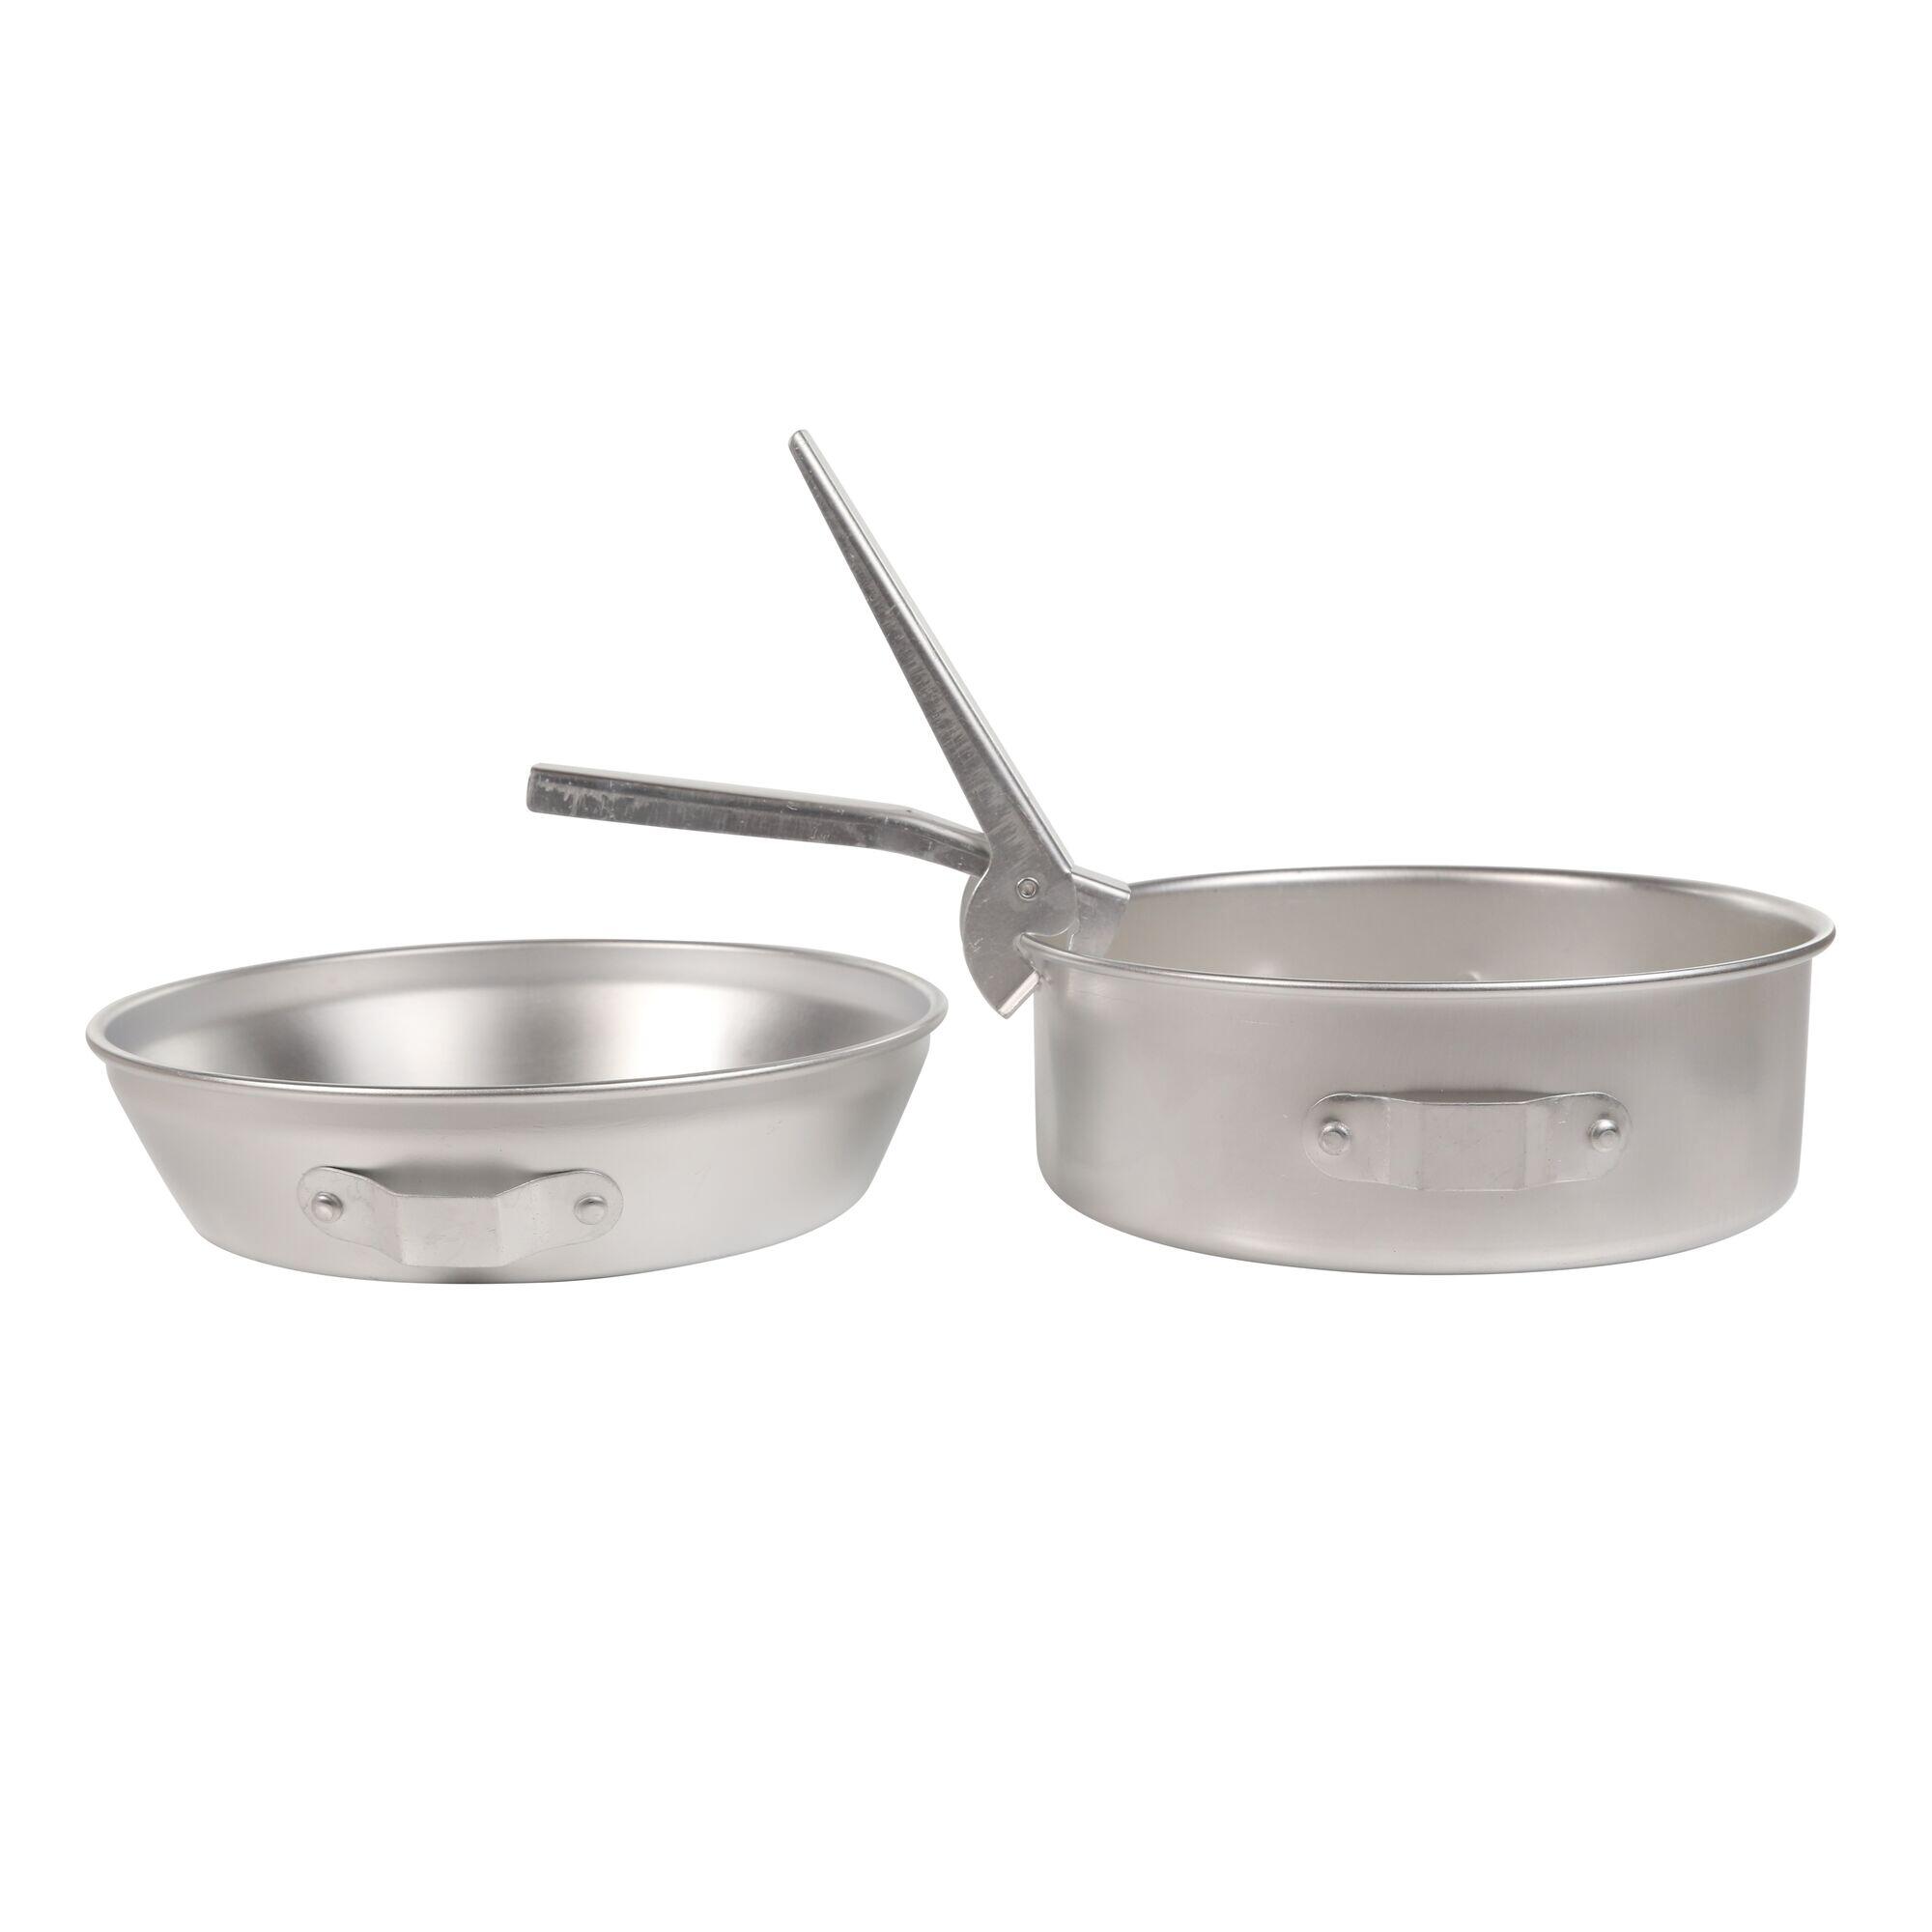 Compact Adults' Camping Cookset - Silver 4/5